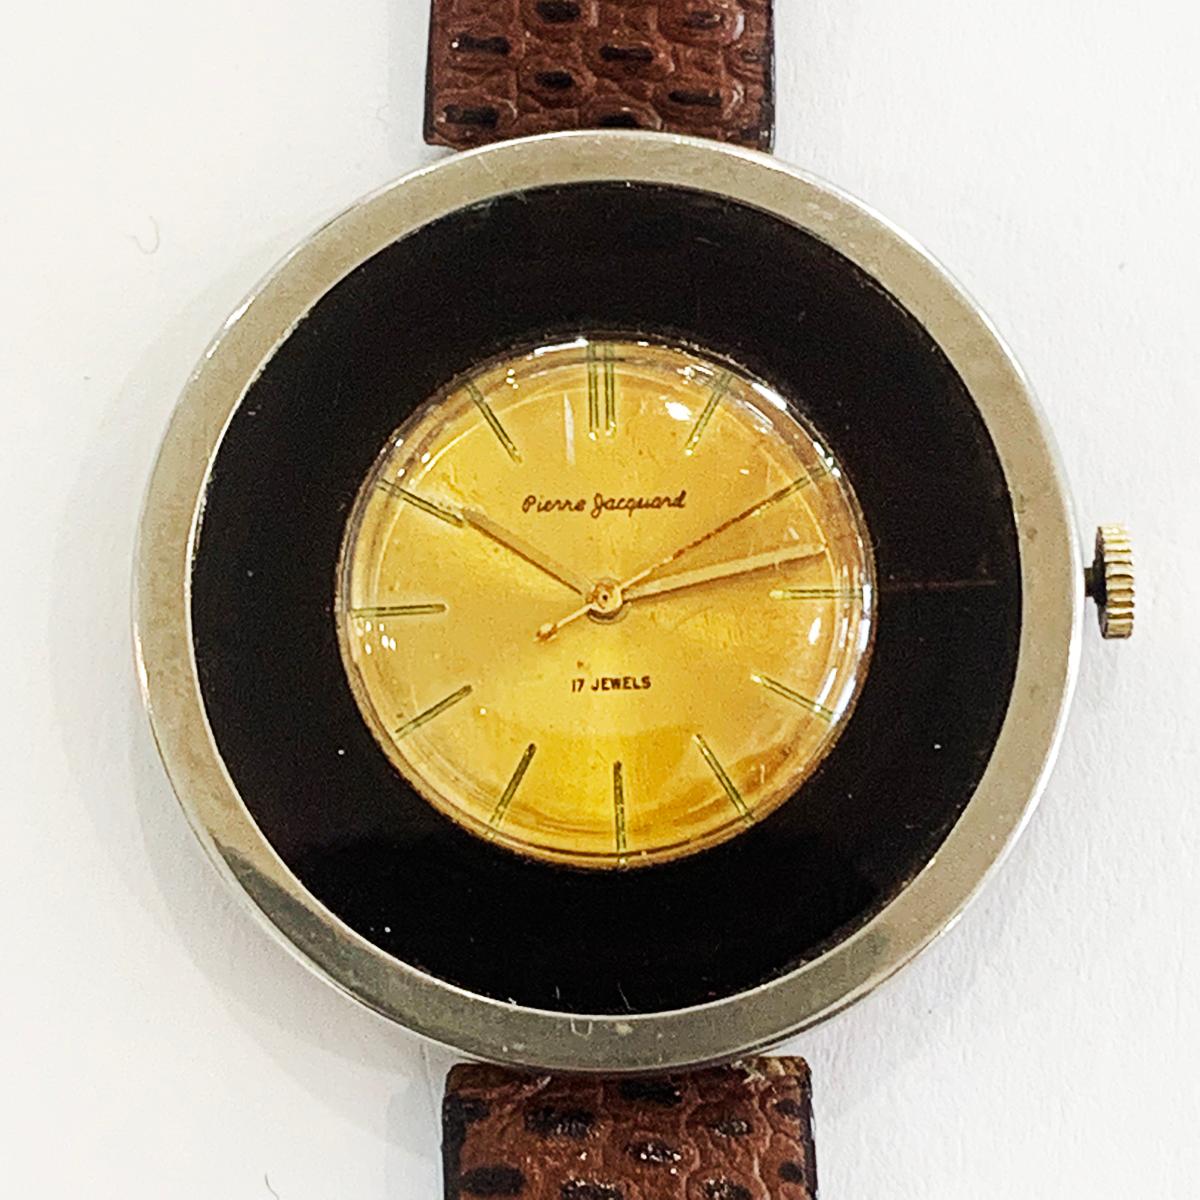 Mid Century, Honey Swirl Bakelite and Gilt Clamper Wrist Watch. All in excellent condition, with a fine, stippled surface to the Bakelite, keeping good time for age, checked, cleaned and timed. Slight age patina to rear of watch, but face is